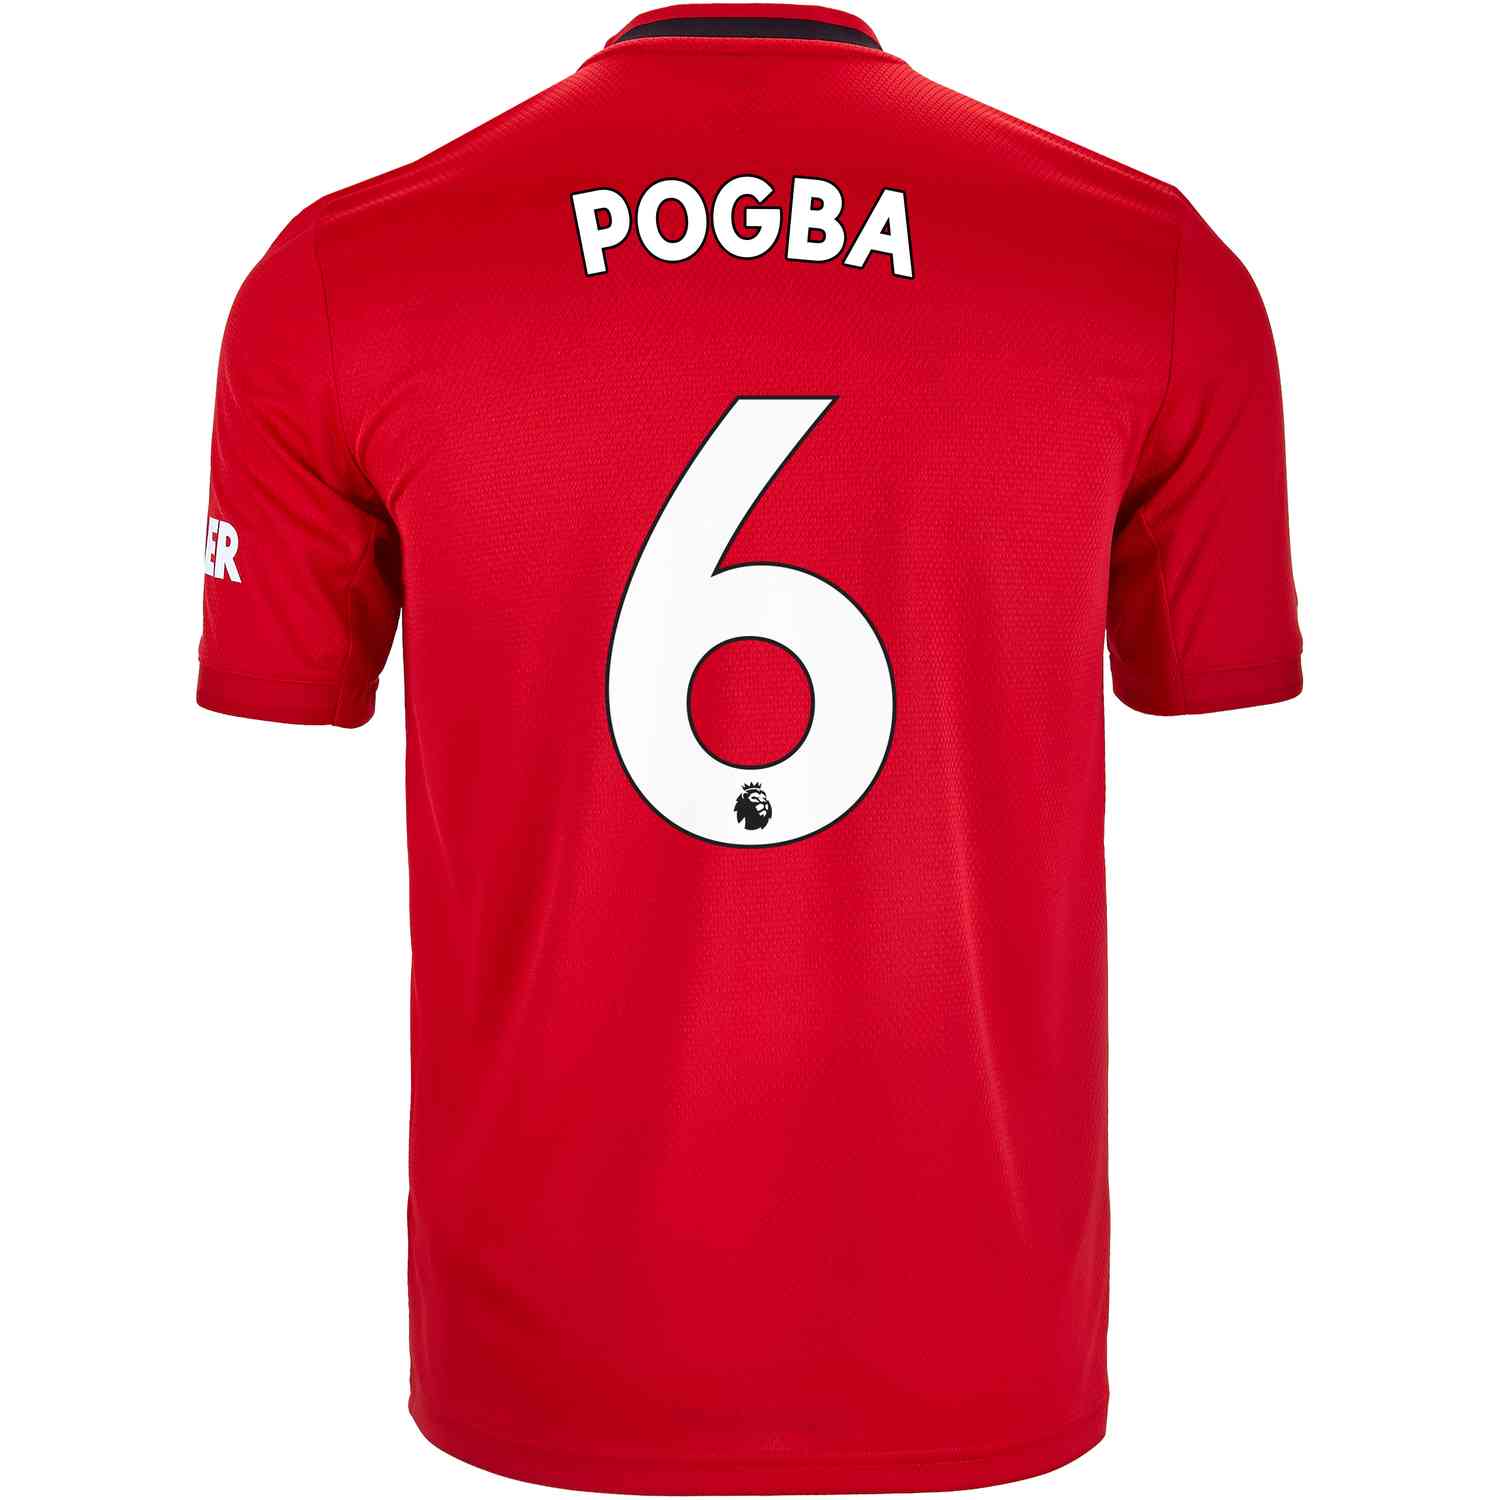 2019/20 Kids Paul Pogba Manchester United Home Jersey ...